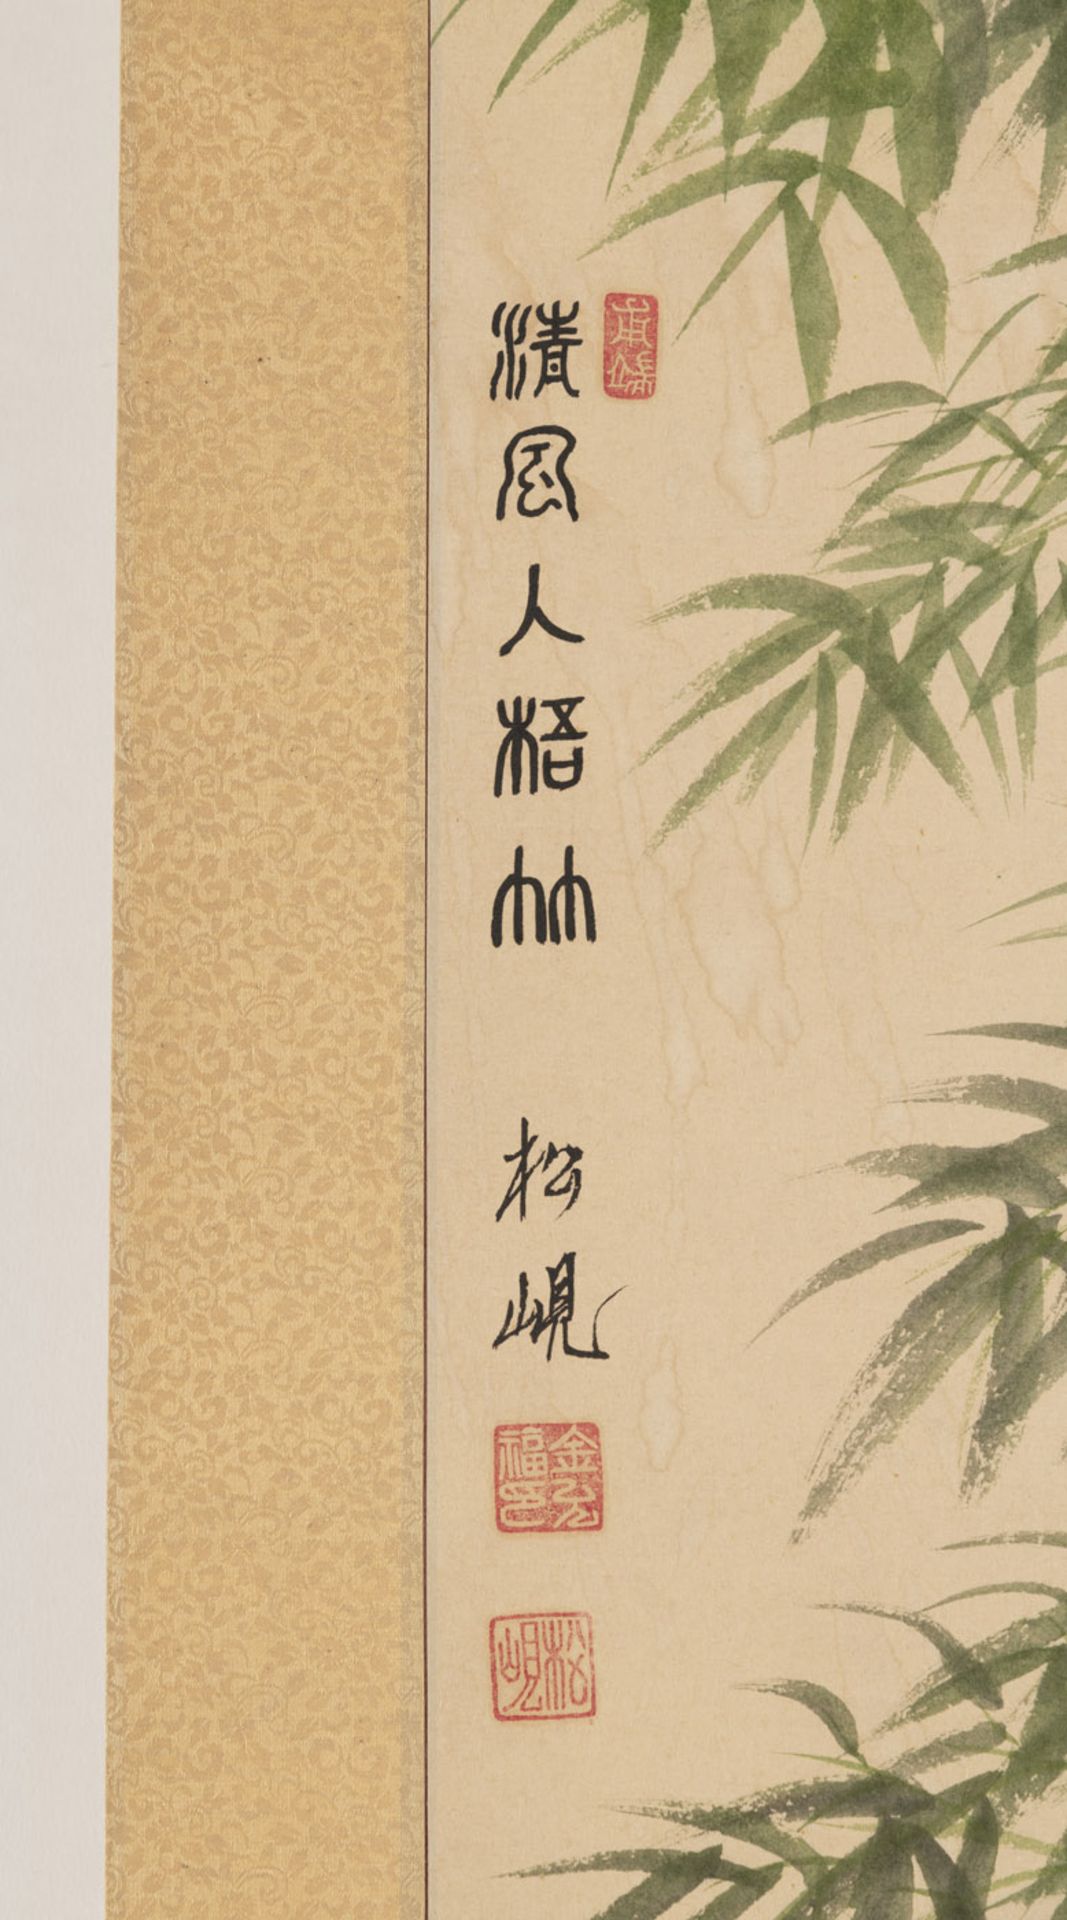 FOUR PAINTINGS DEPICTING THE "FOUR NOBLES": PLUM, ORCHID, BAMBOO AND CHRYSANTHEMUM - Image 9 of 16